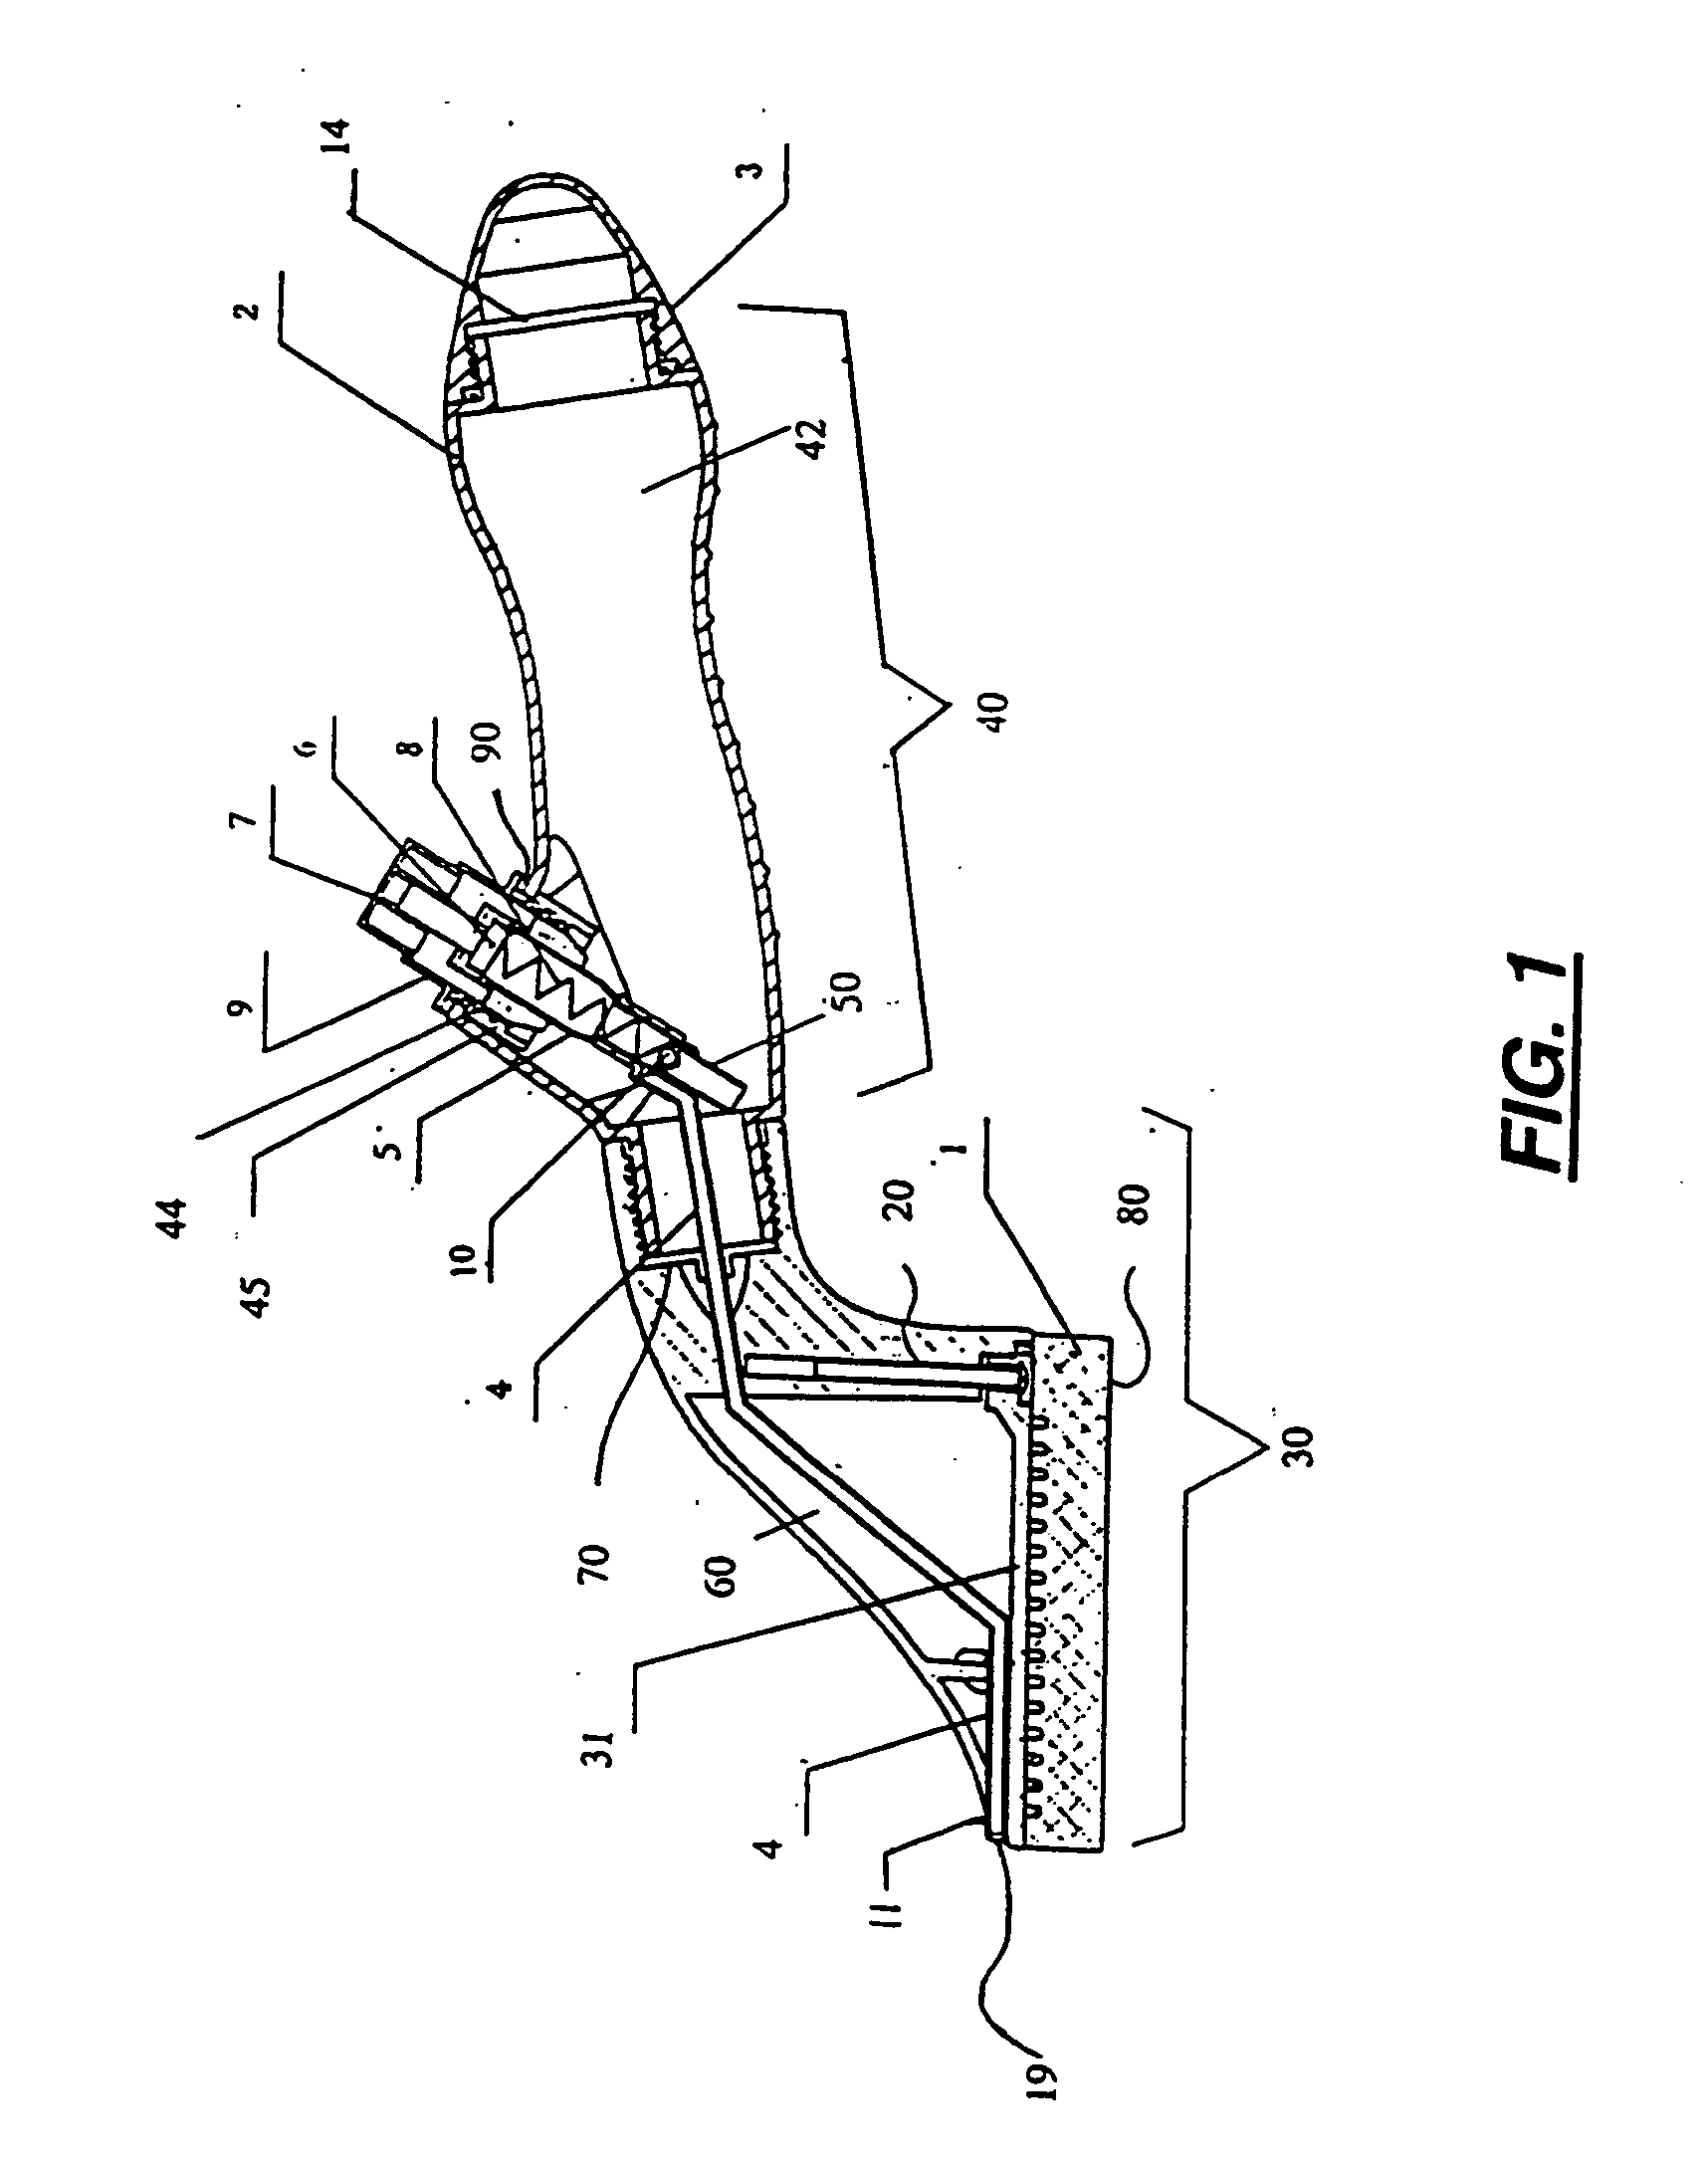 Spray controlled cleaning brush apparatus and method for use